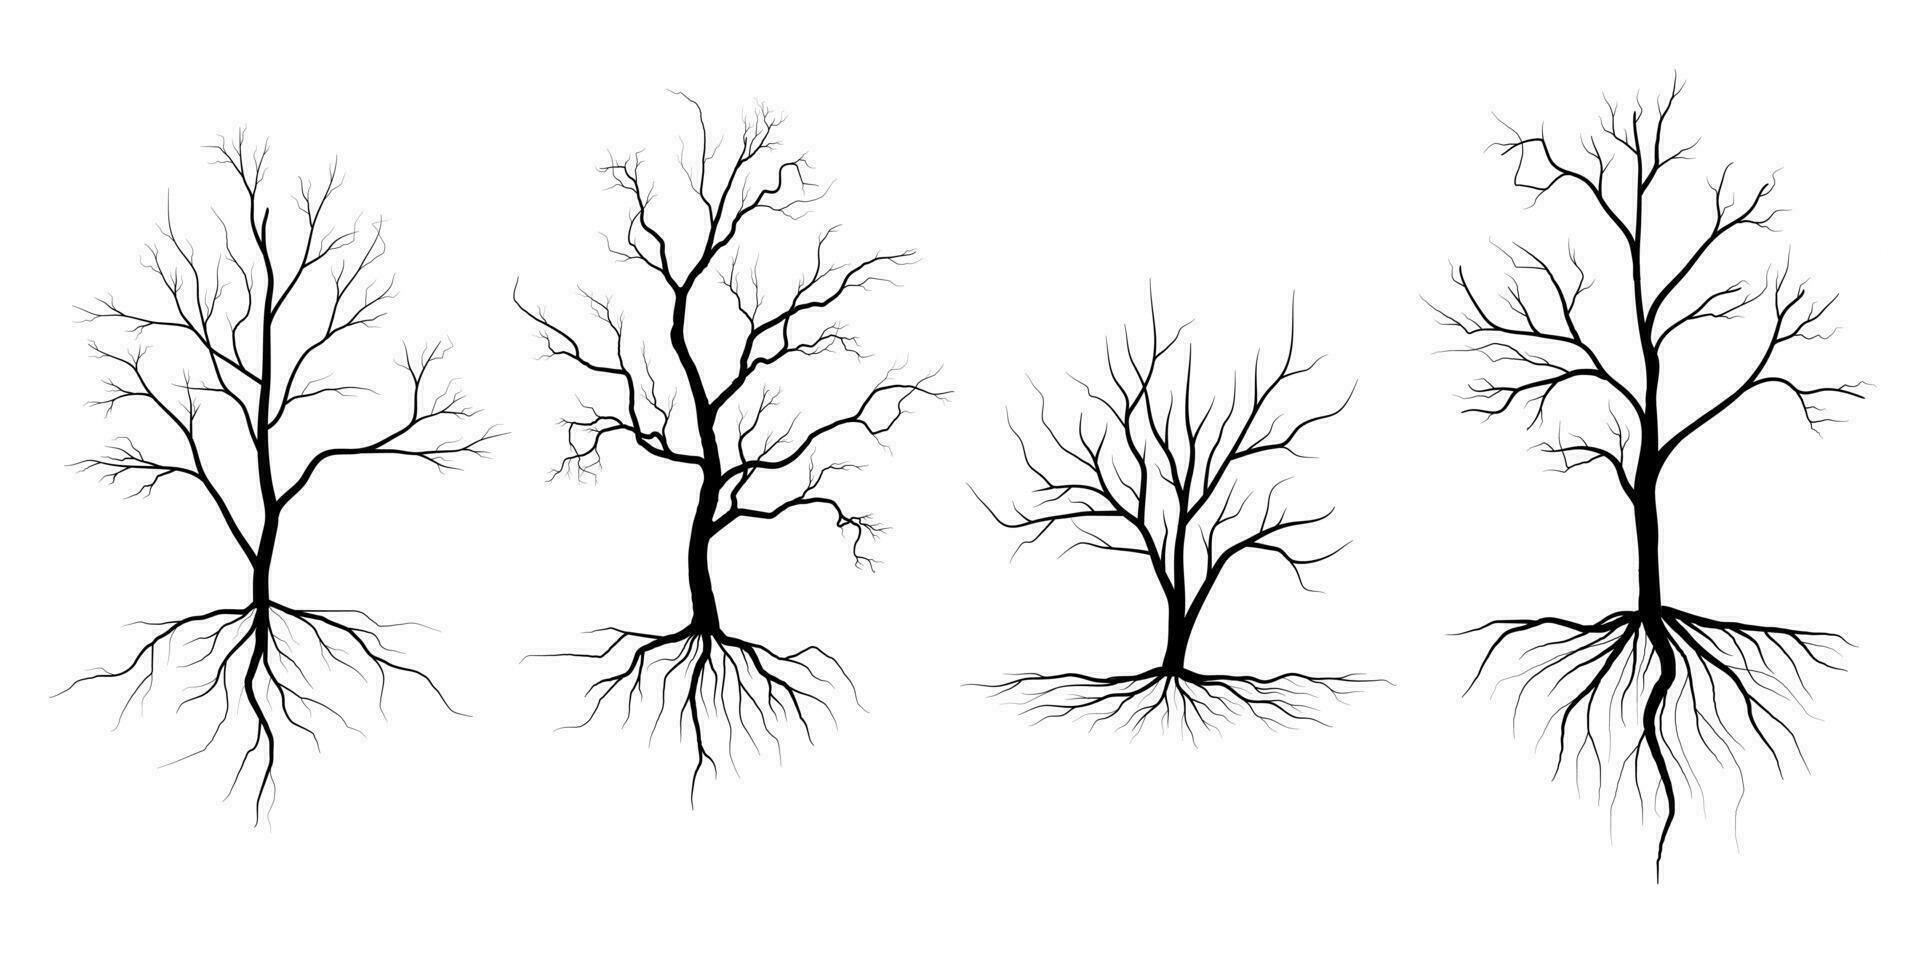 Big Collection Black Tree or Naked trees silhouettes vector. Hand drawn isolated illustrations. vector